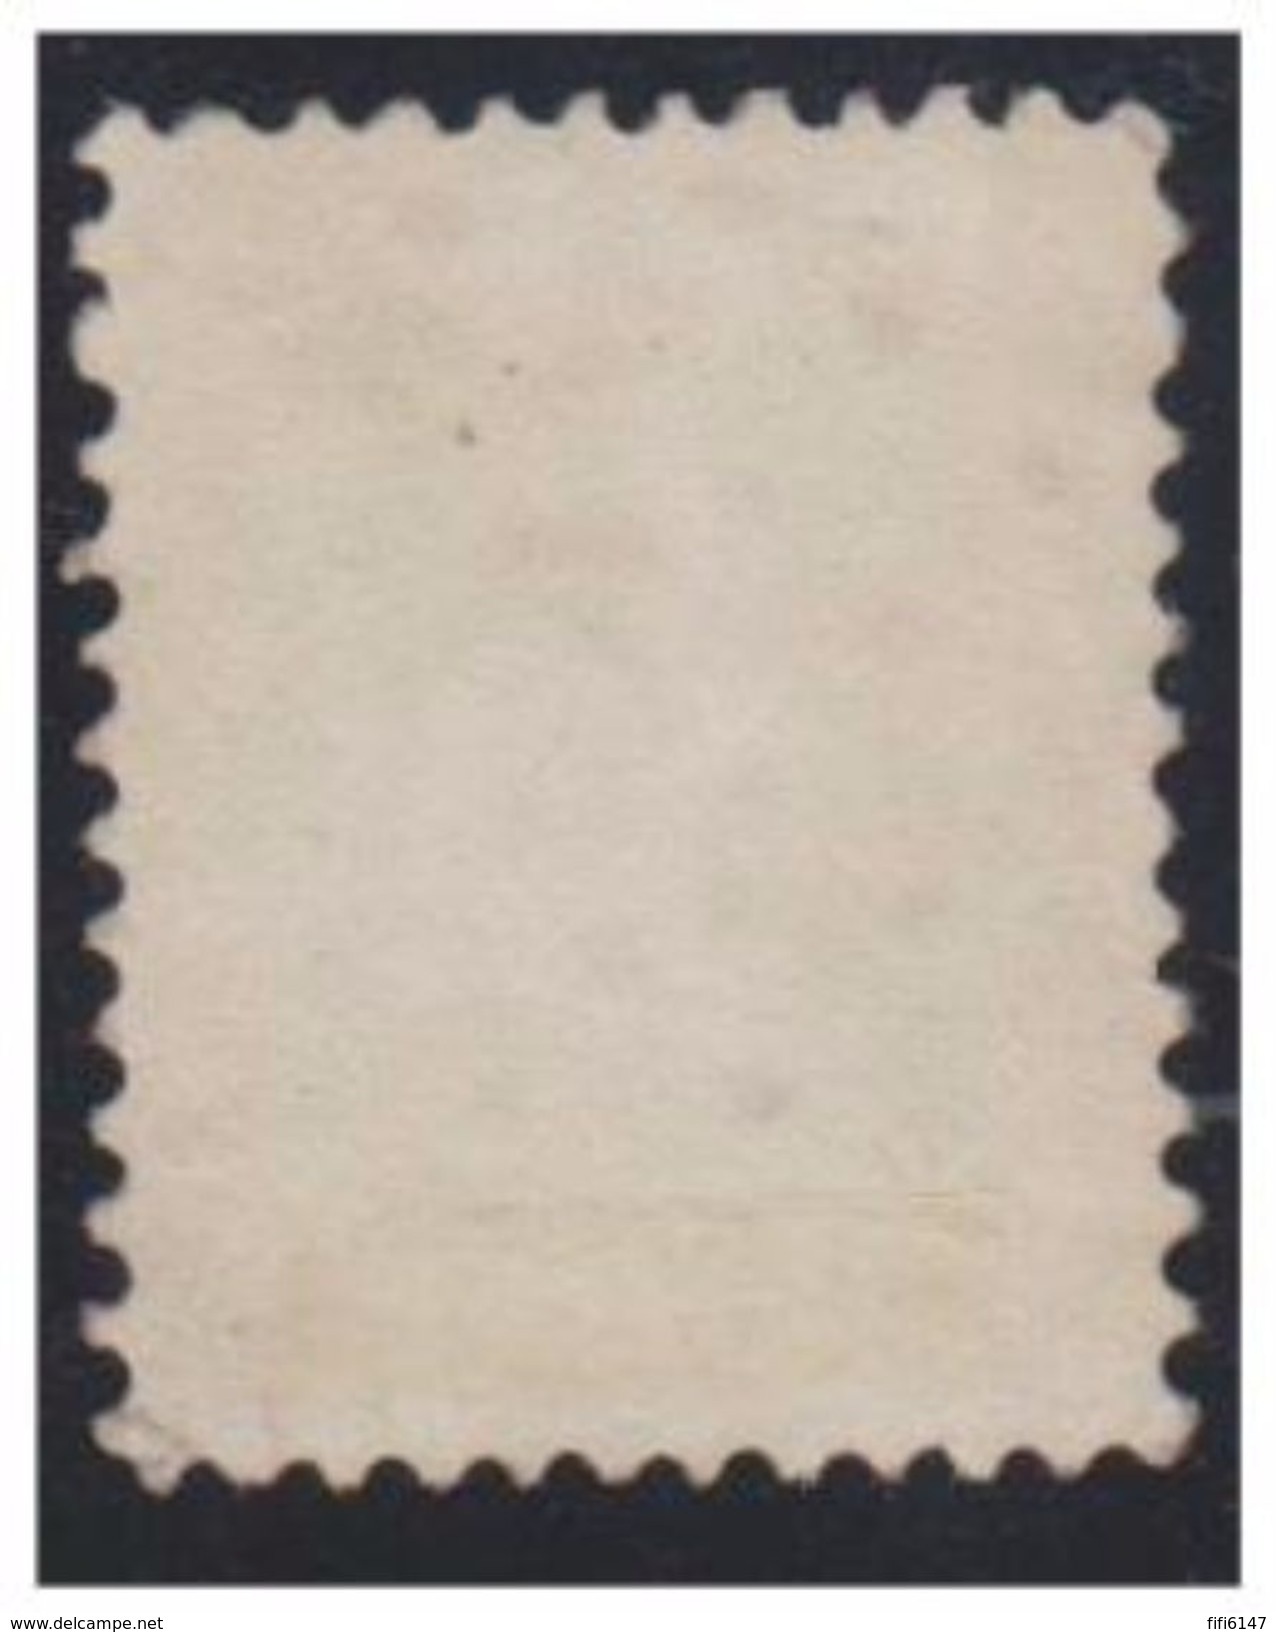 PAYS-BAS -- NERDERLAND -- N° 12 50c  OBLITERE -- UN ANGLE FAIBLE -- VOIR SCAN -- - Used Stamps